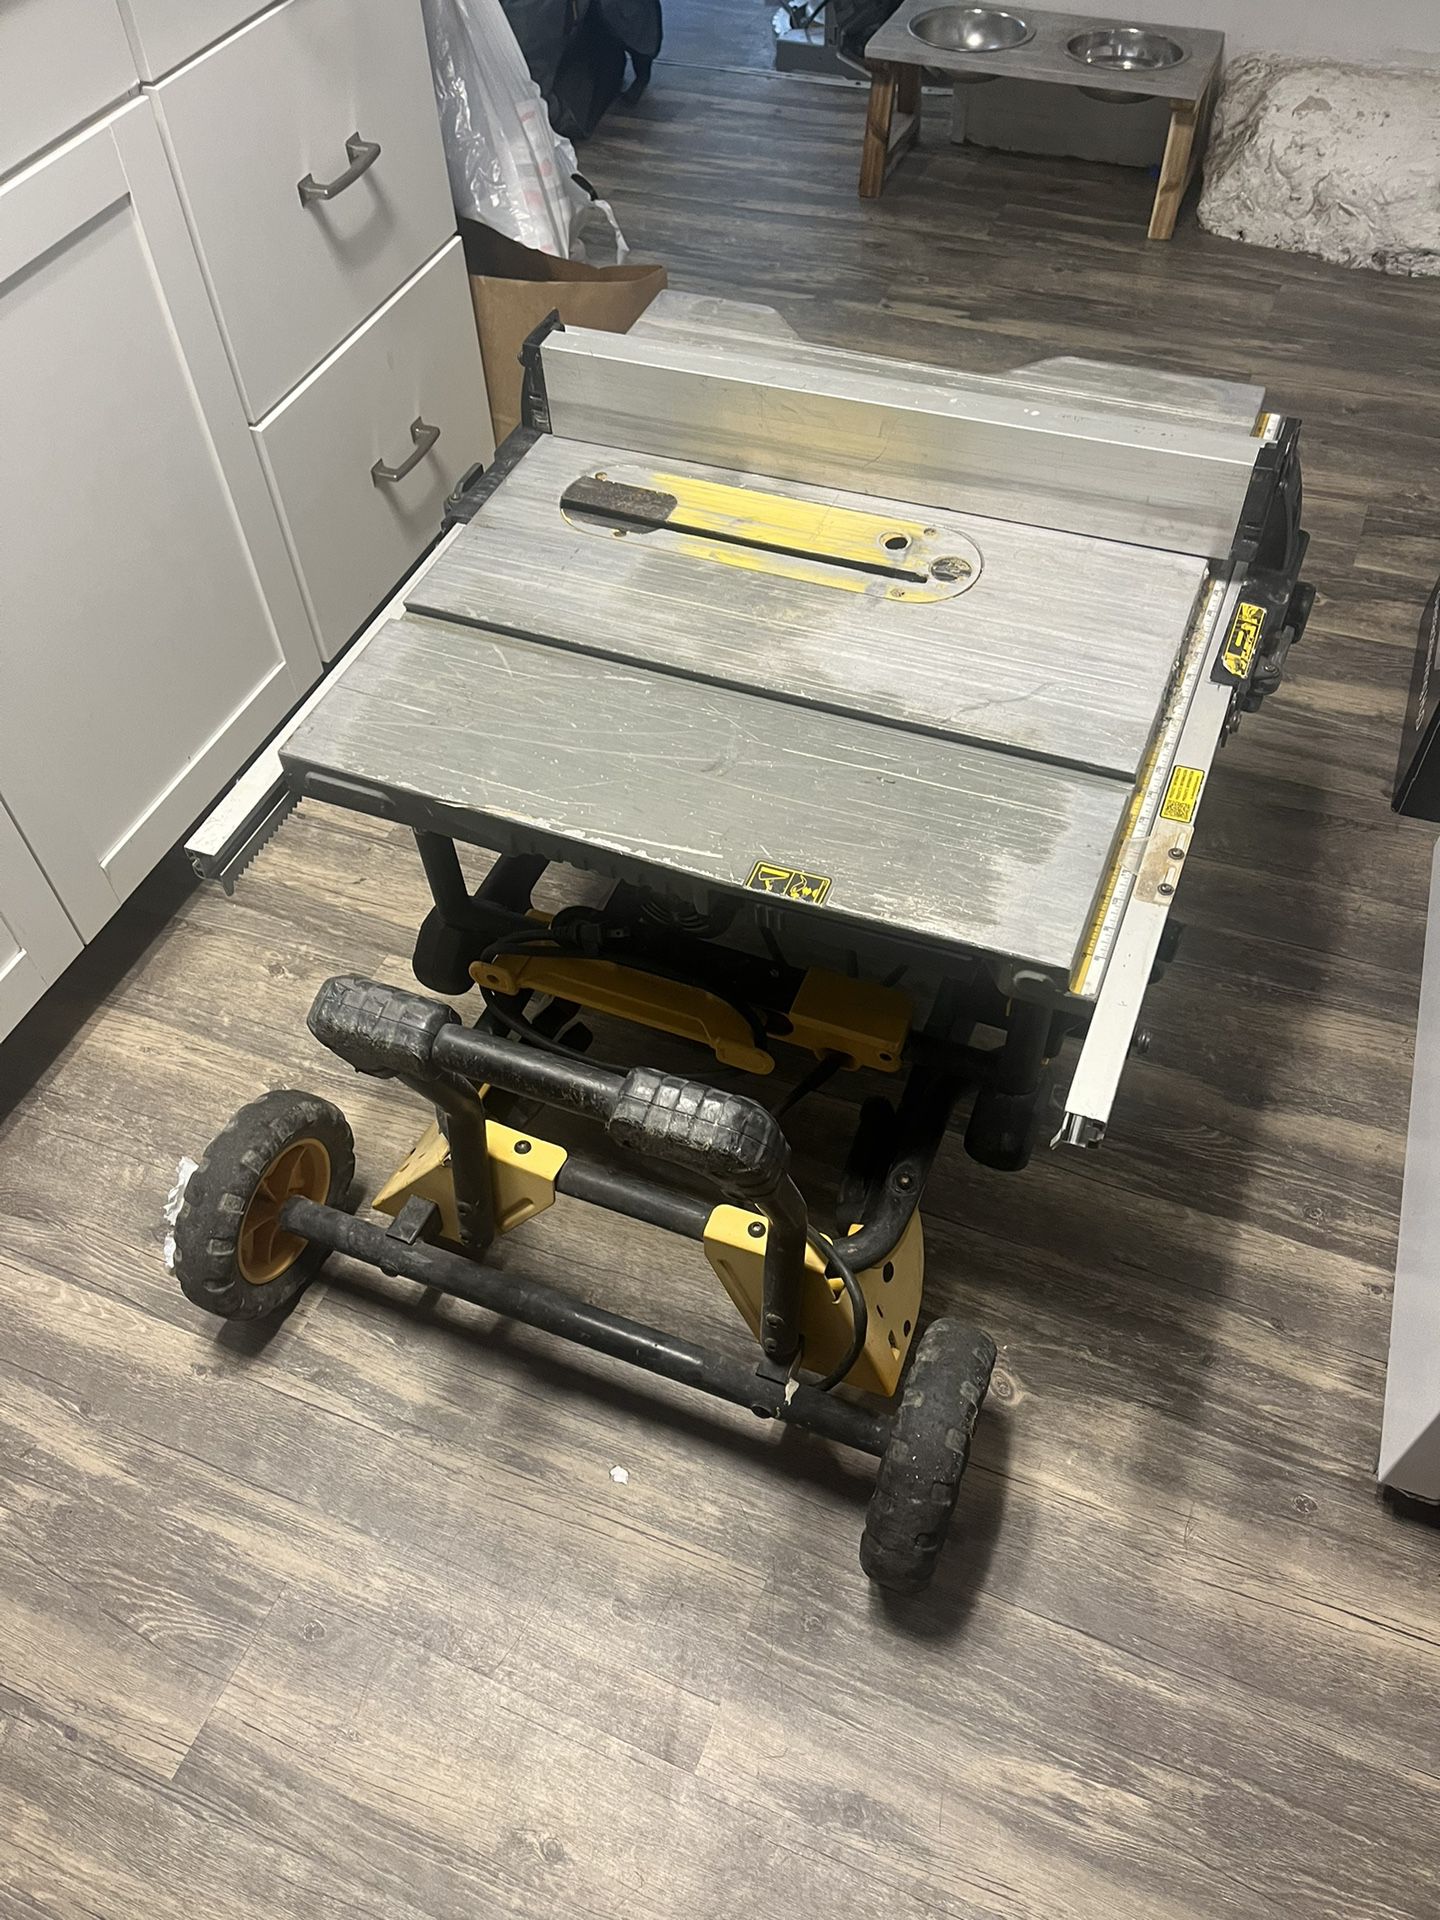 12” Dewalt Table Saw With Stand 